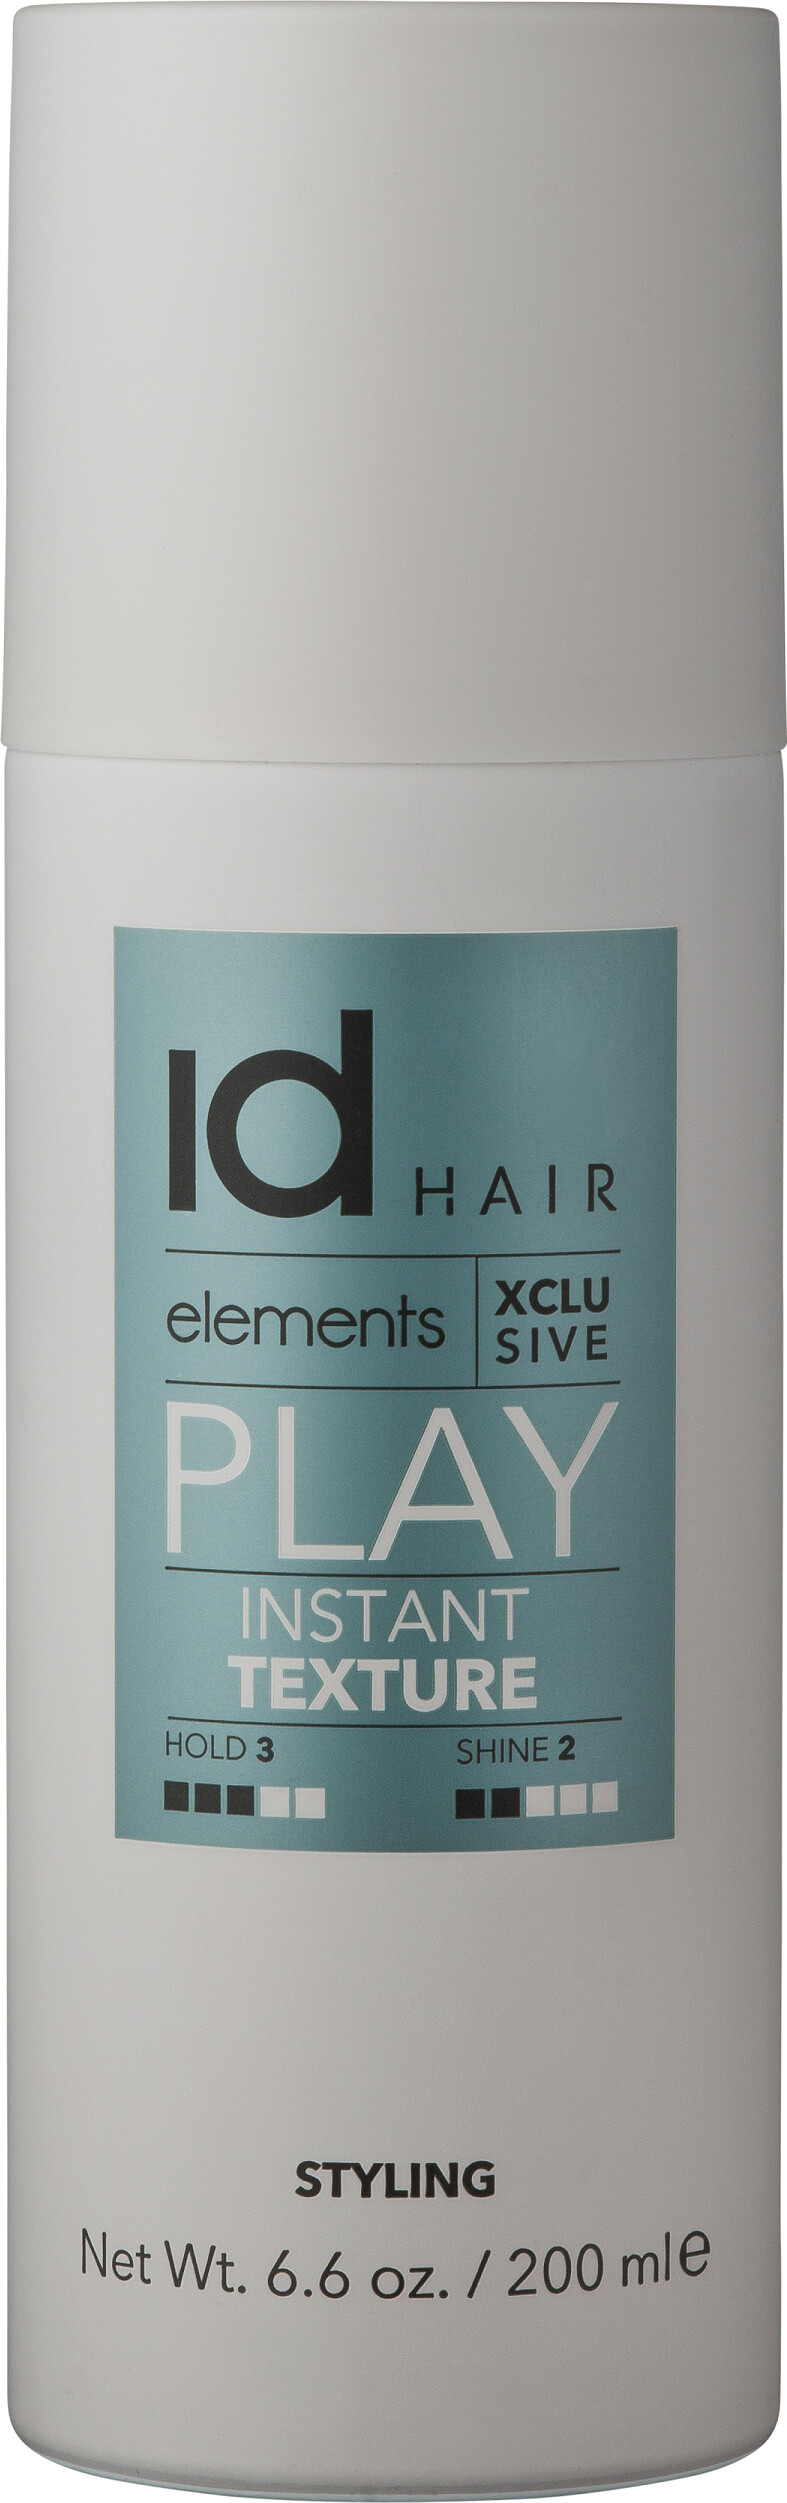 Billede af Id Hair - Elements Xclusive Play Instant Texture - 200 Ml